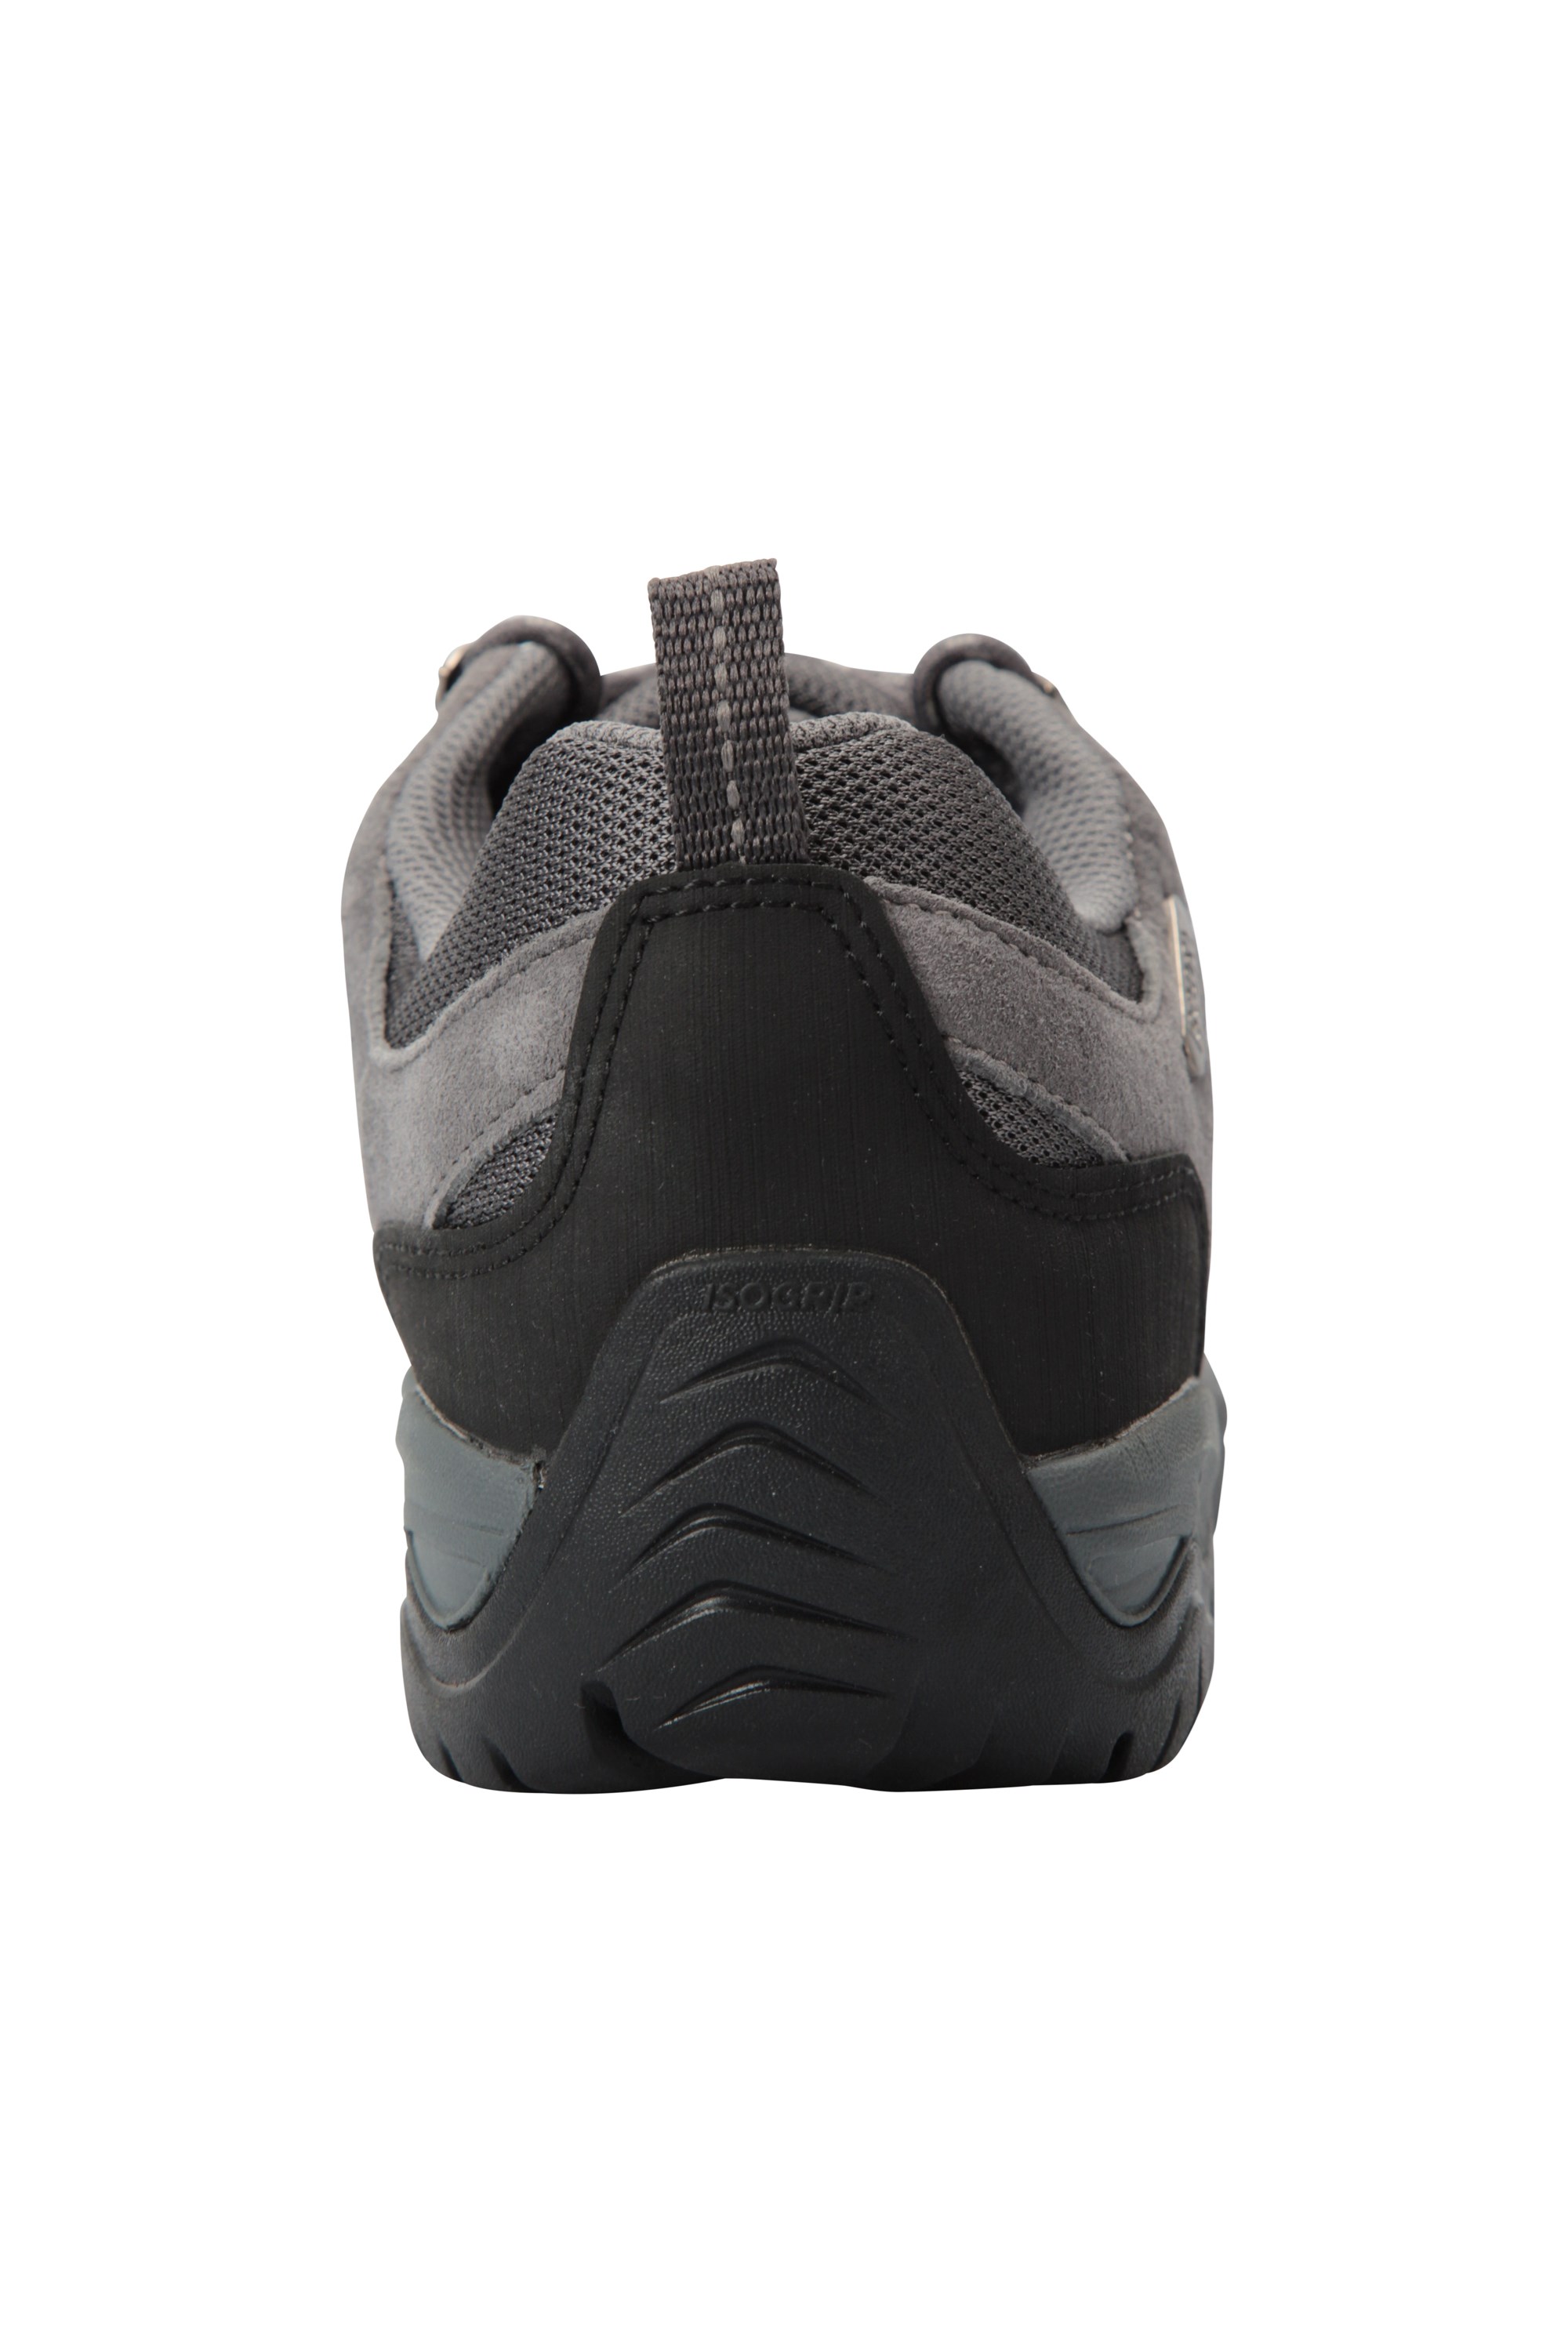 aspect isogrip mens waterproof shoes